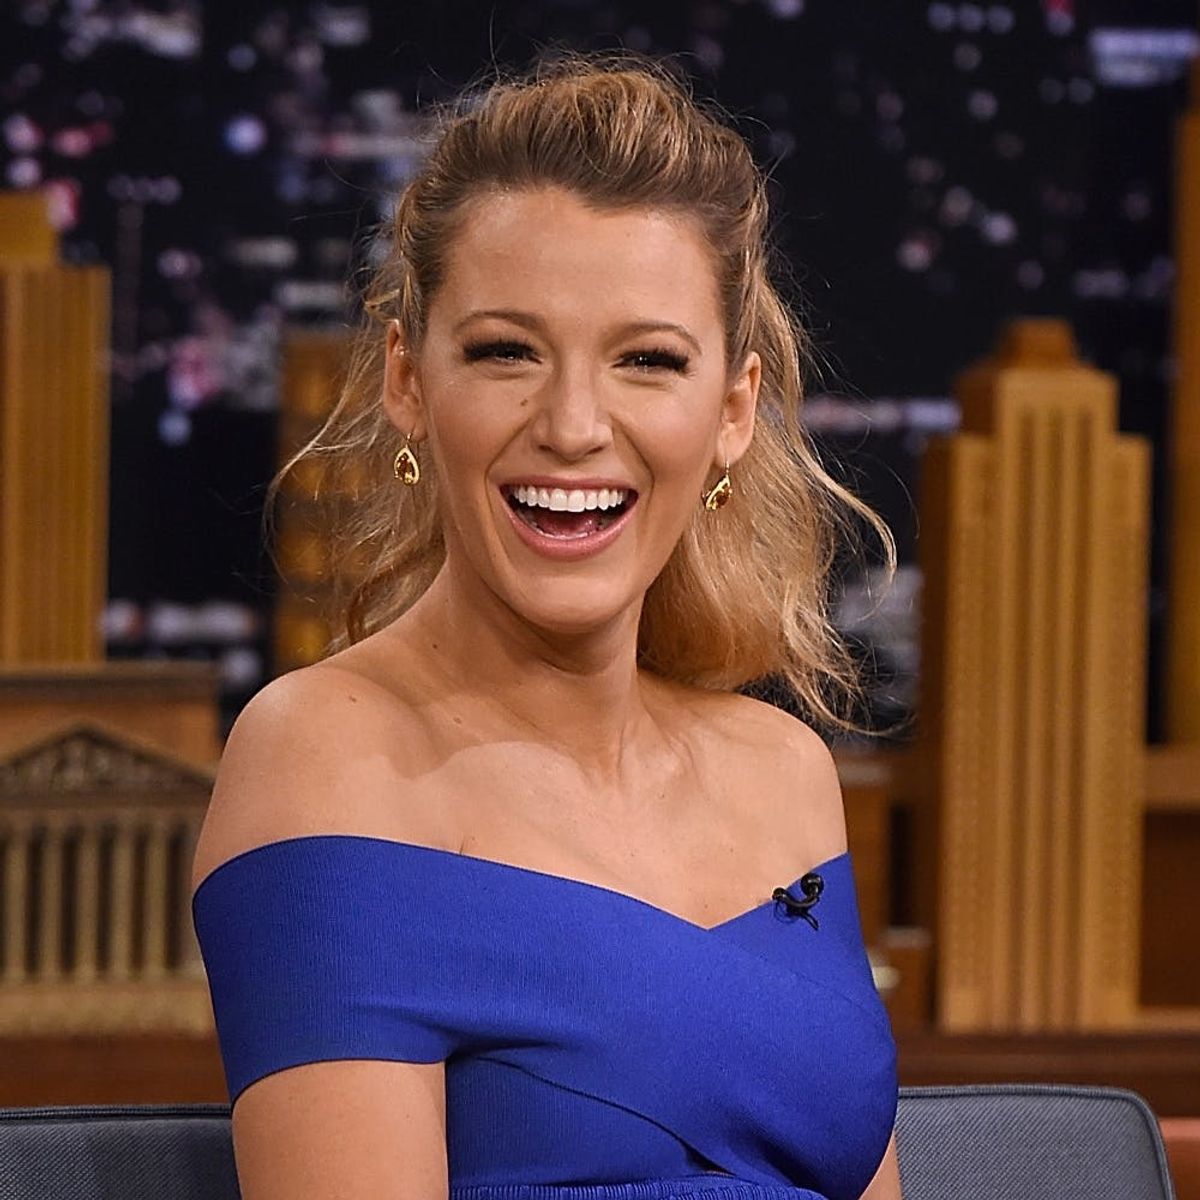 Blake Lively FINALLY Admits She’s Pregnant With Baby #2